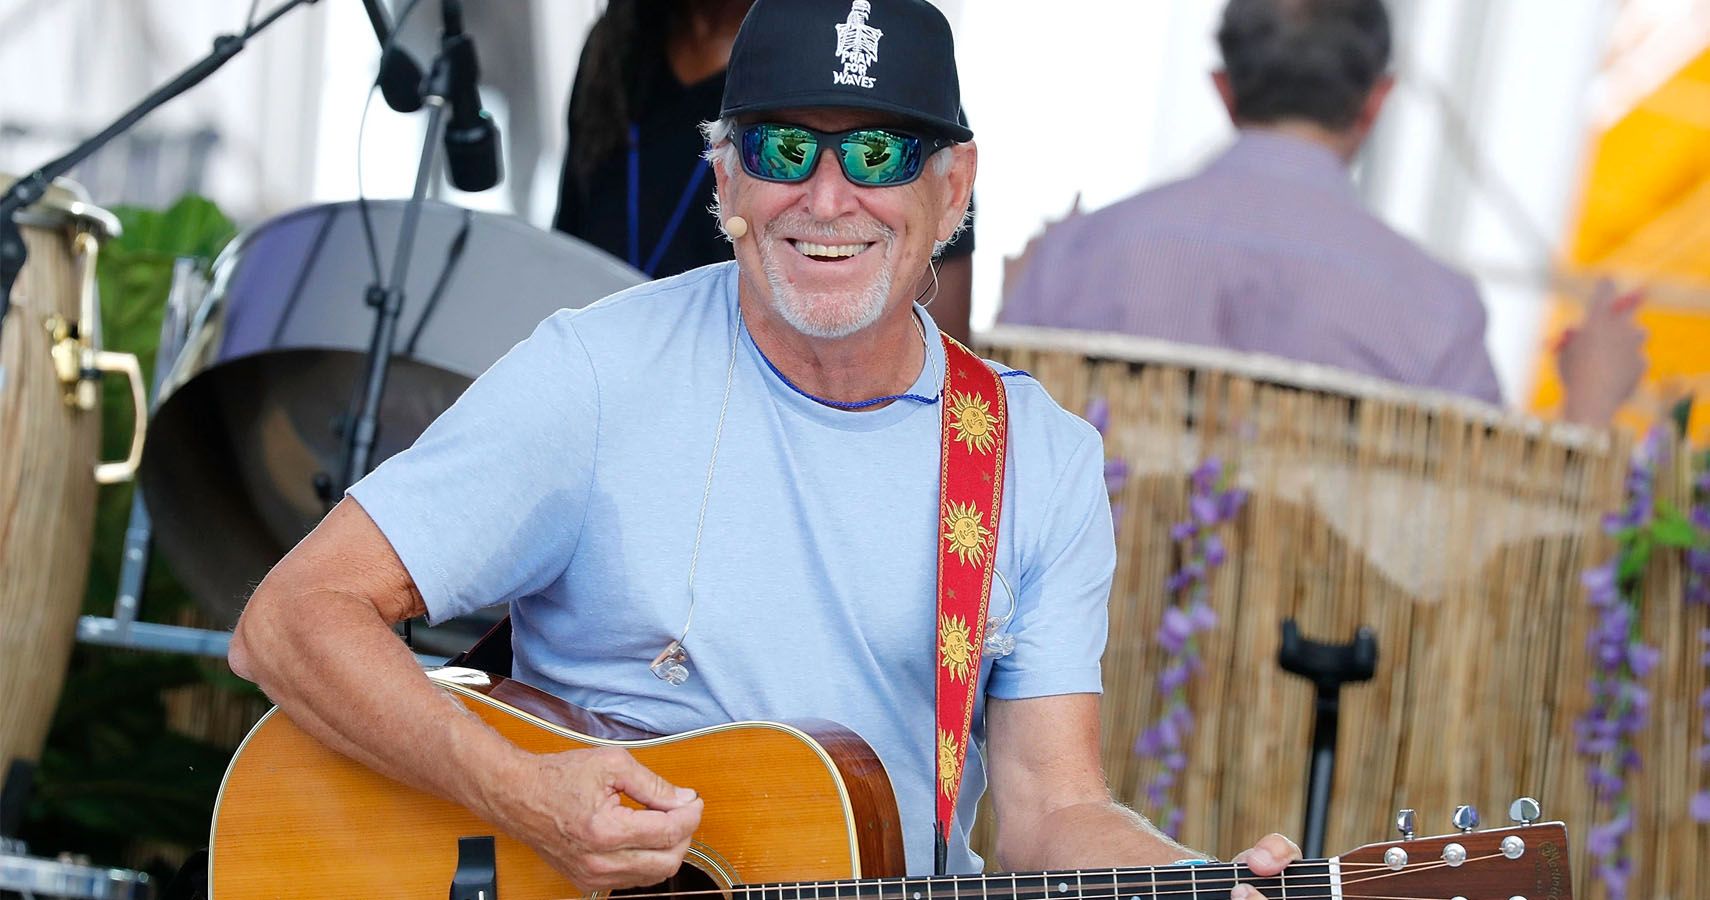 Jimmy Buffet is taking his famous Margaritaville brand to the next level wi...